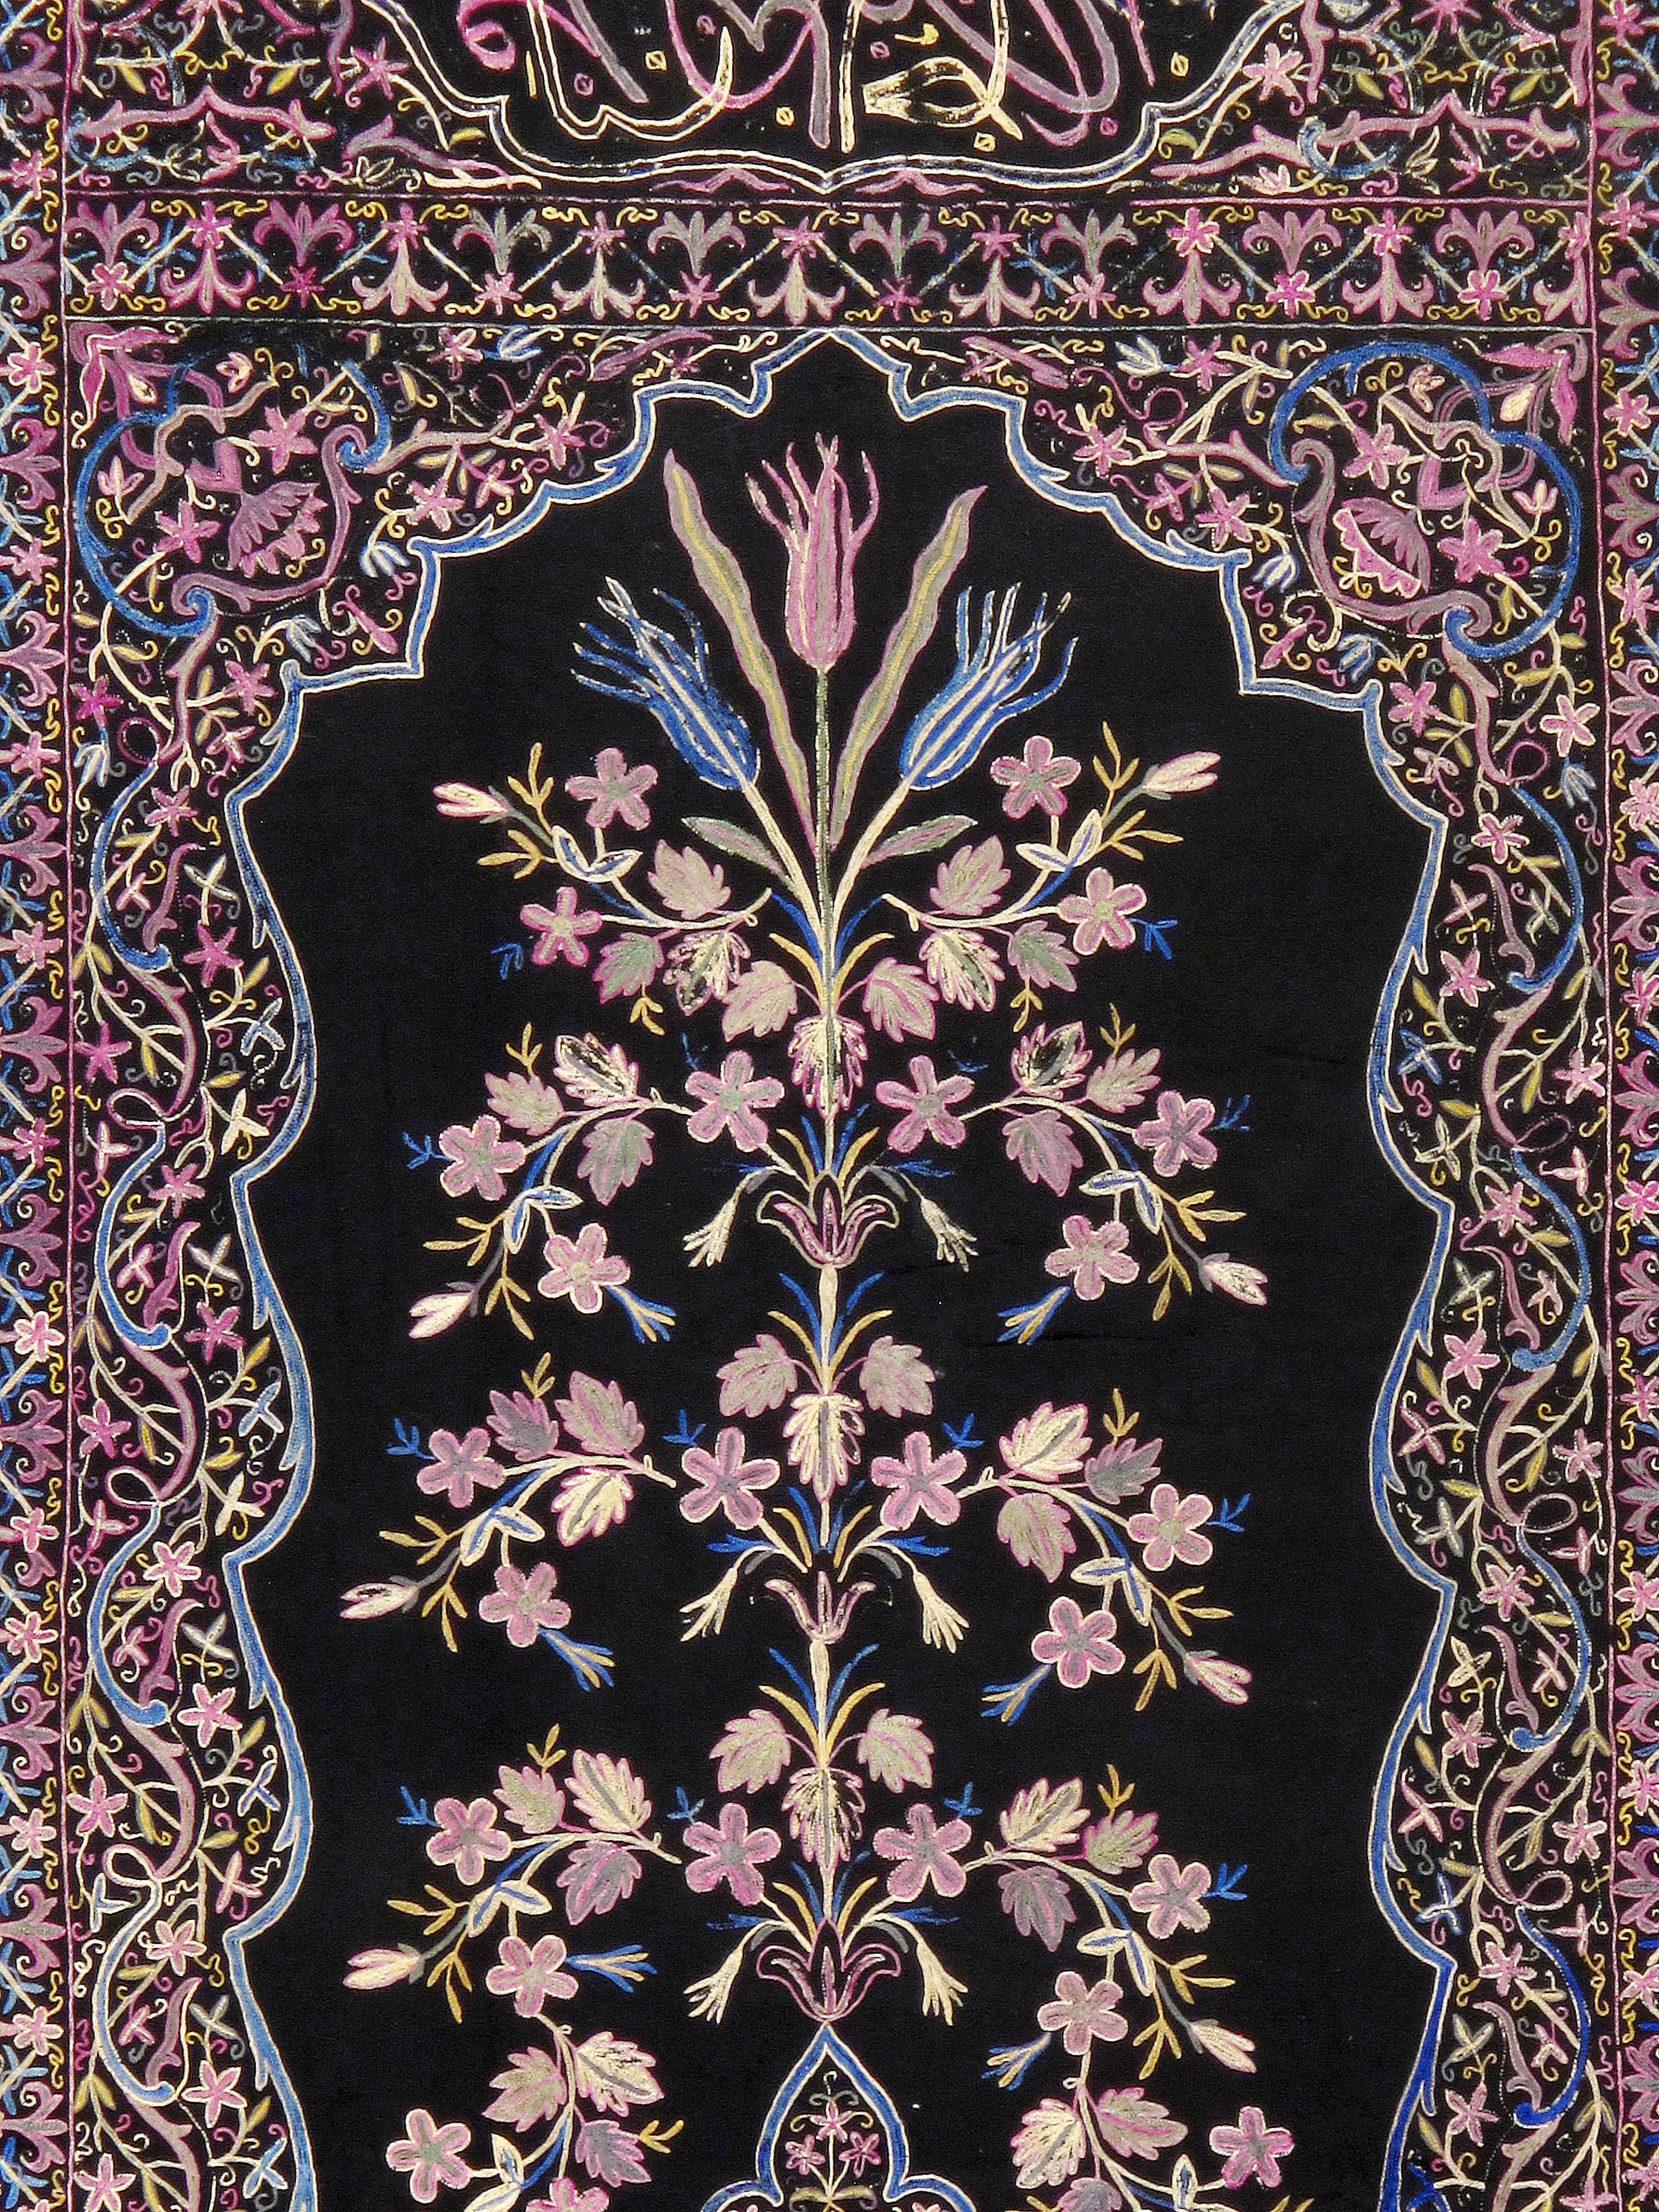 An antique Turkish flat-stitched Textile tapestry from the second quarter of the 20th century.